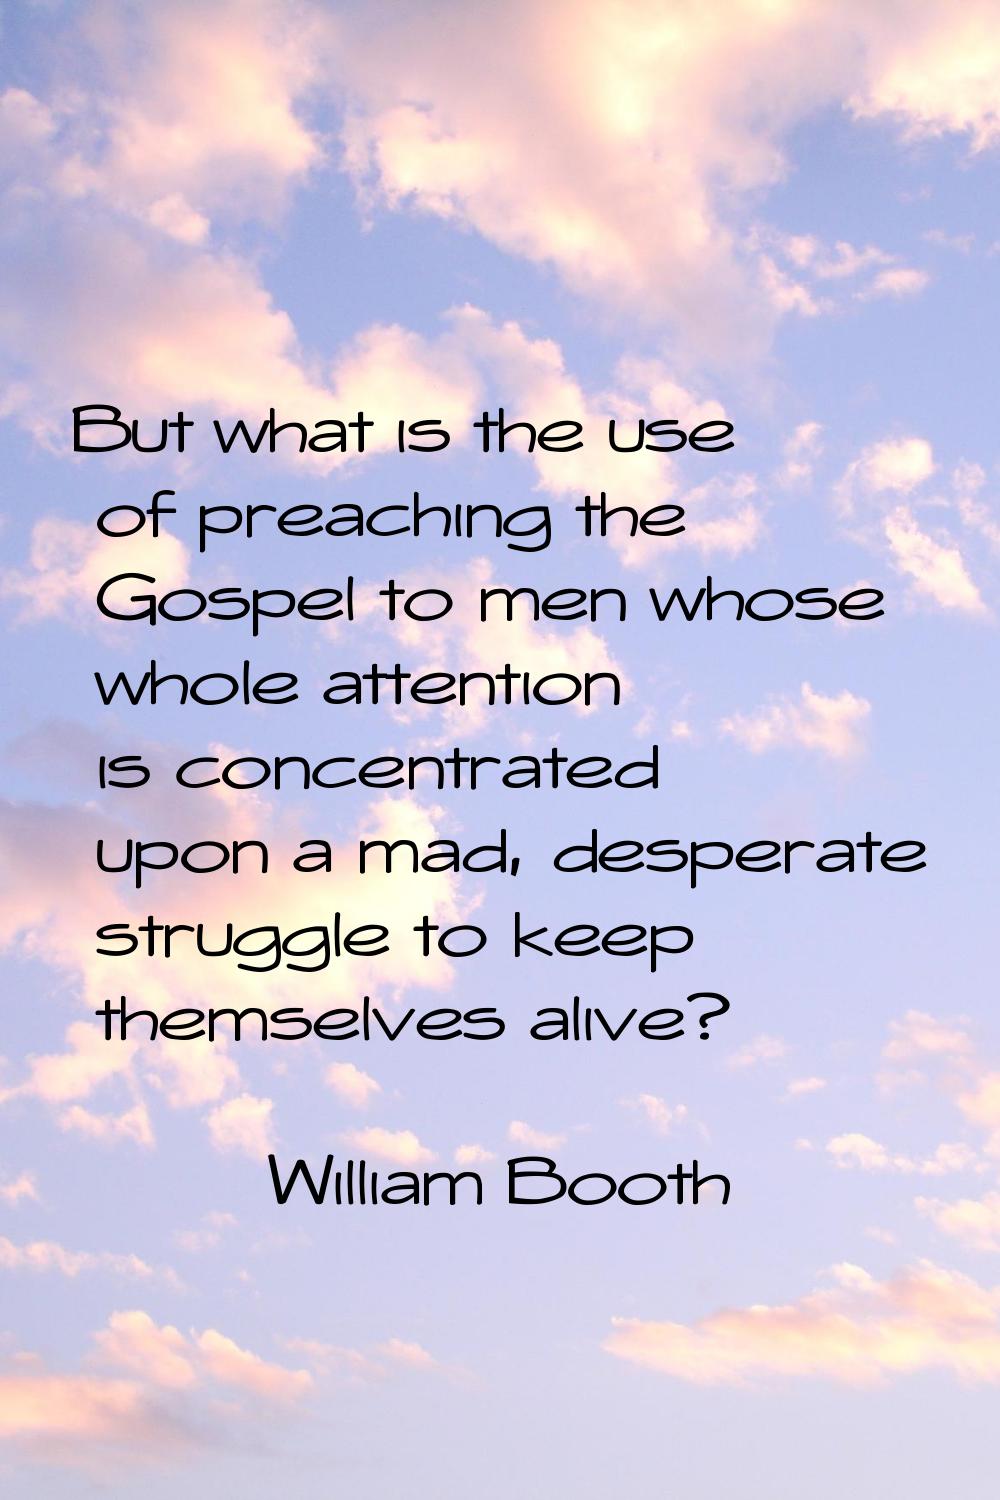 But what is the use of preaching the Gospel to men whose whole attention is concentrated upon a mad